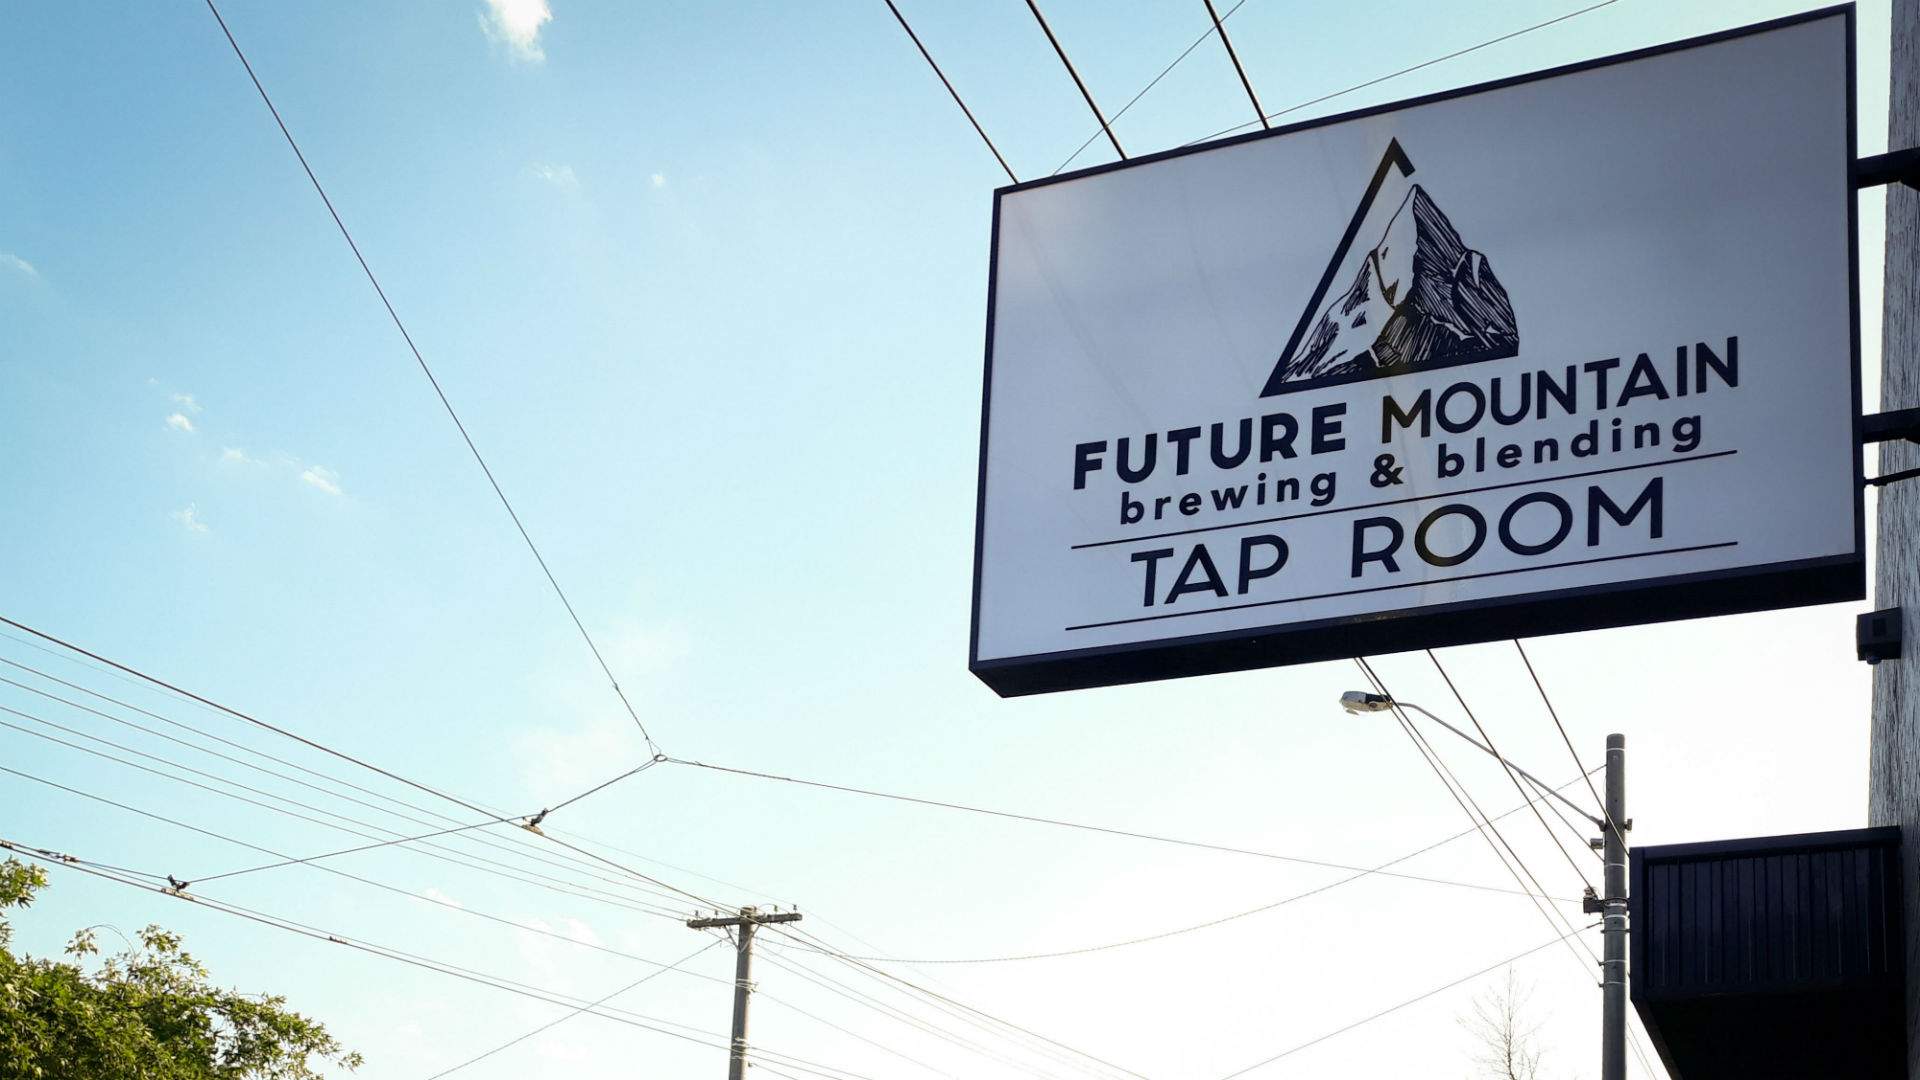 Future Mountain Is Melbourne's New Brewery and Taproom with a Focus on Funky Wild Ales